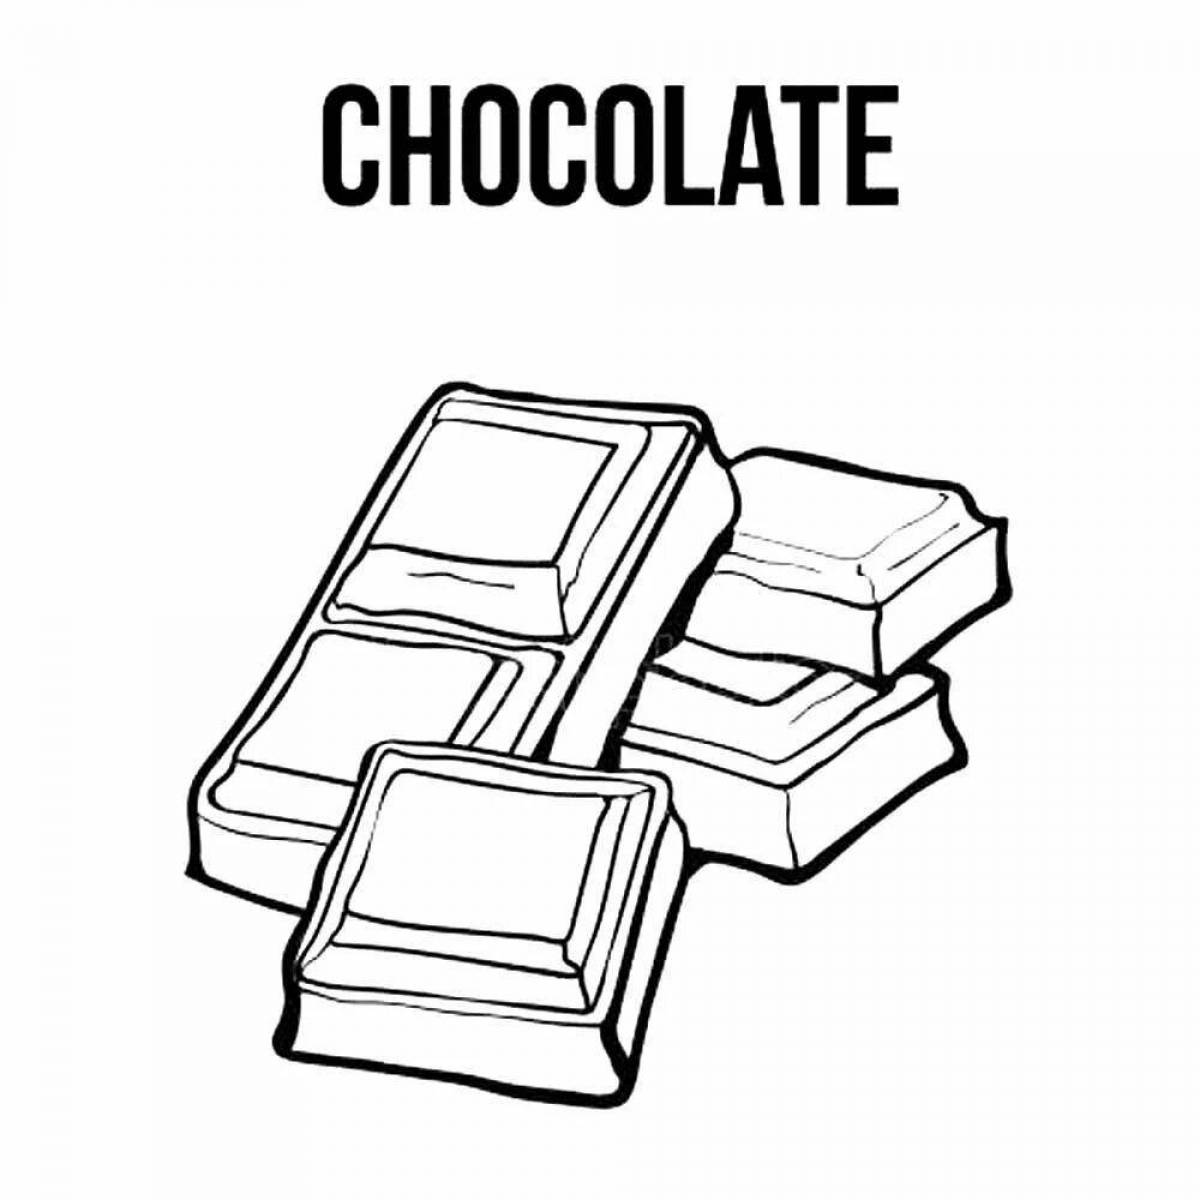 Intriguing chocolate bar coloring for kids